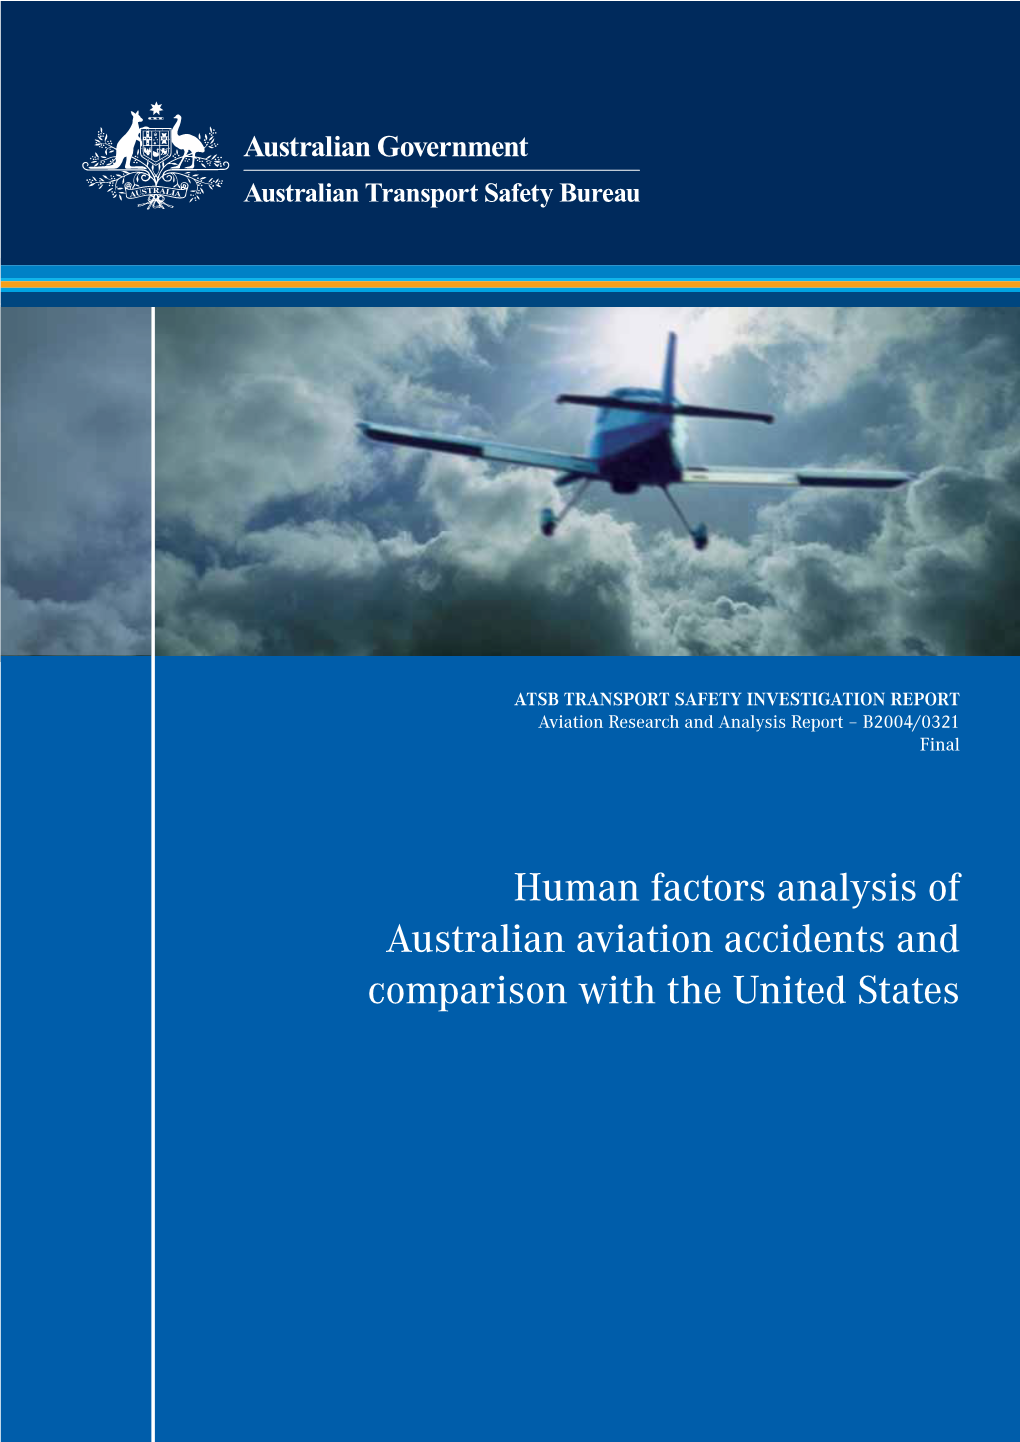 Human Factors Analysis of Australian Aviation Accidents and Comparison with the United States